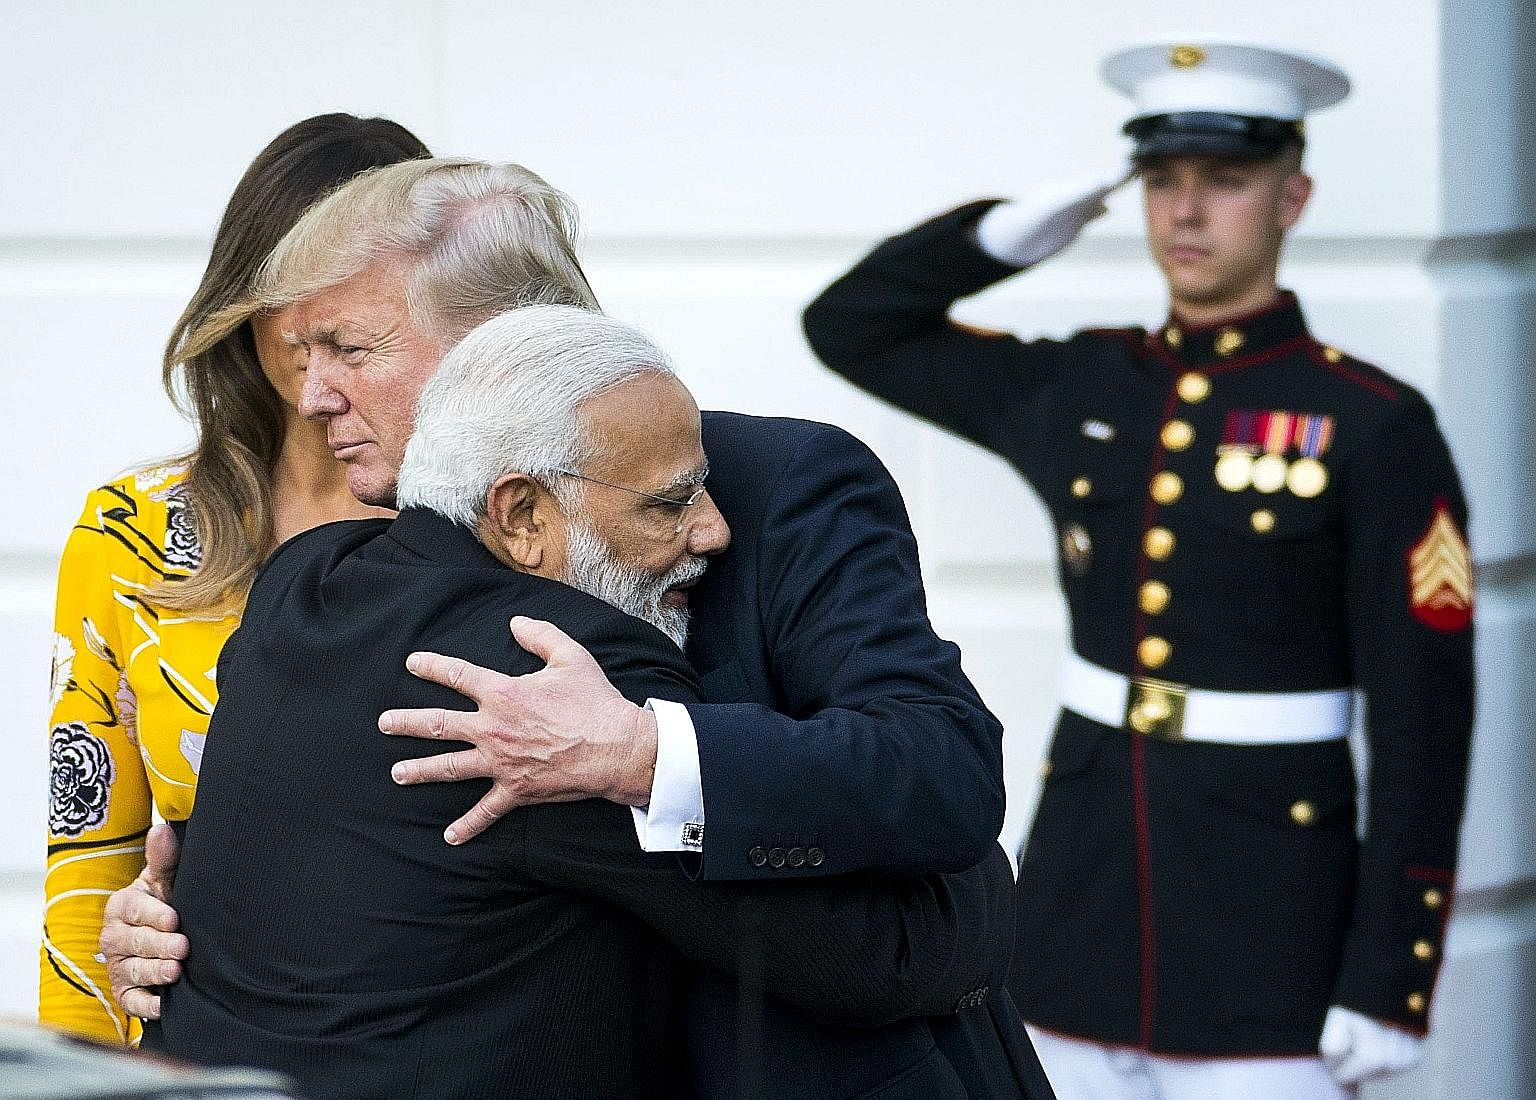 Indian Prime Minister Narendra Modi and US President Donald Trump exchanging a hug following their dinner at the White House on Monday. The Indian leader is known to hug leaders he gets on with.